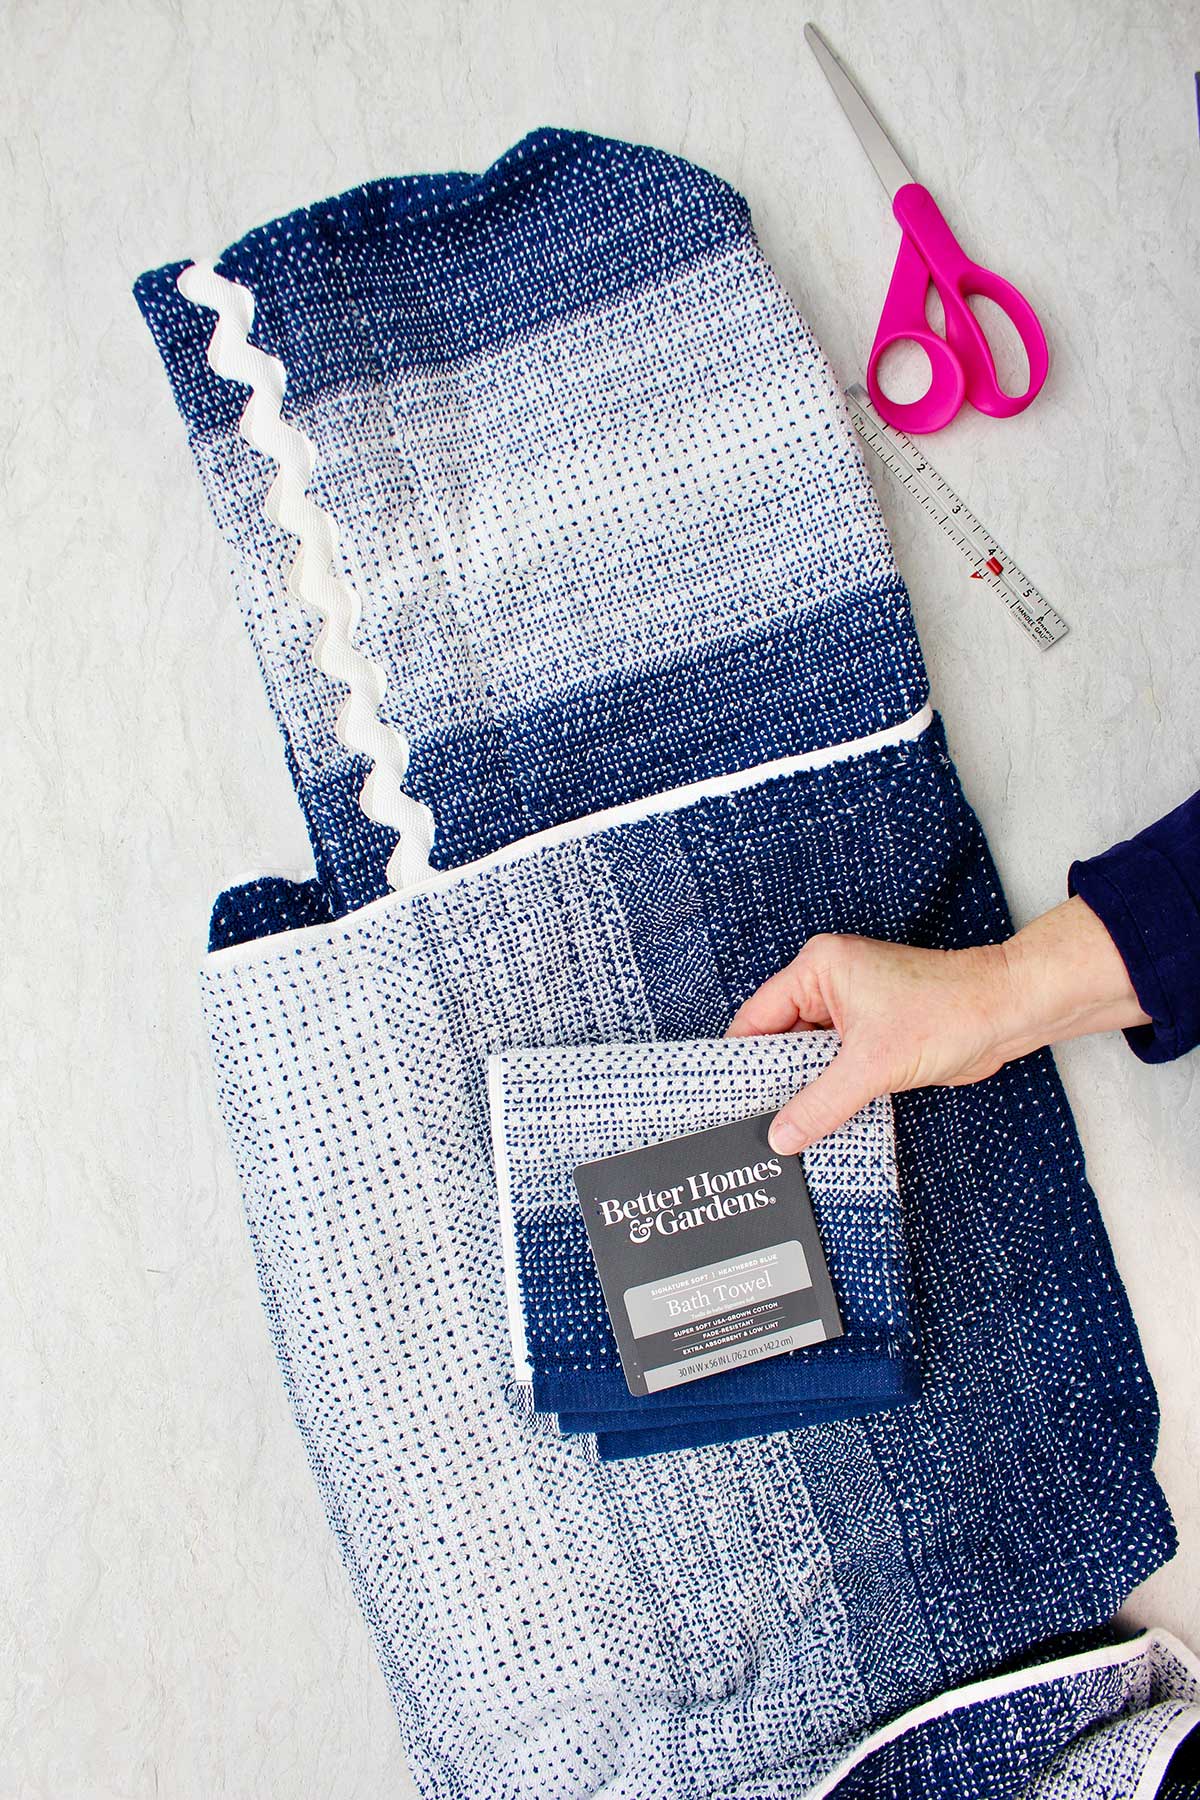 Hand holding a folded blue and white bath towel from Better Homes & Gardens with completed hooded towel in background.